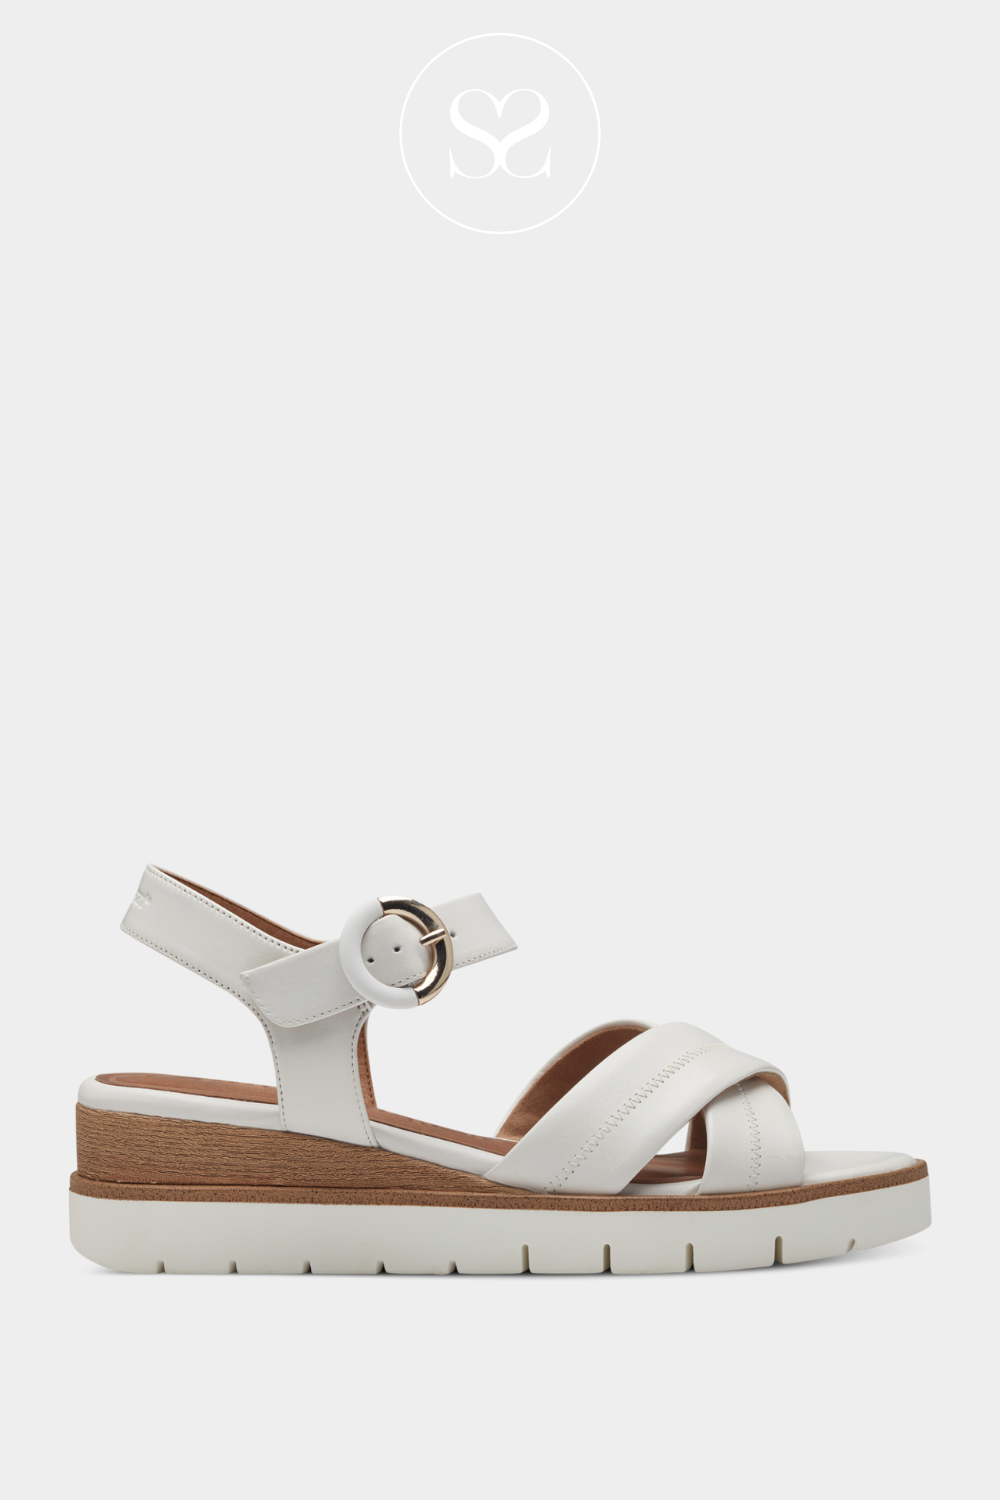 TAMARIS 1-28202-42 WHITE LEATHER WEDGE SANDAL WITH CRISS CROSS STRAPS AND ADJUSTABLE ANKLE STRAP